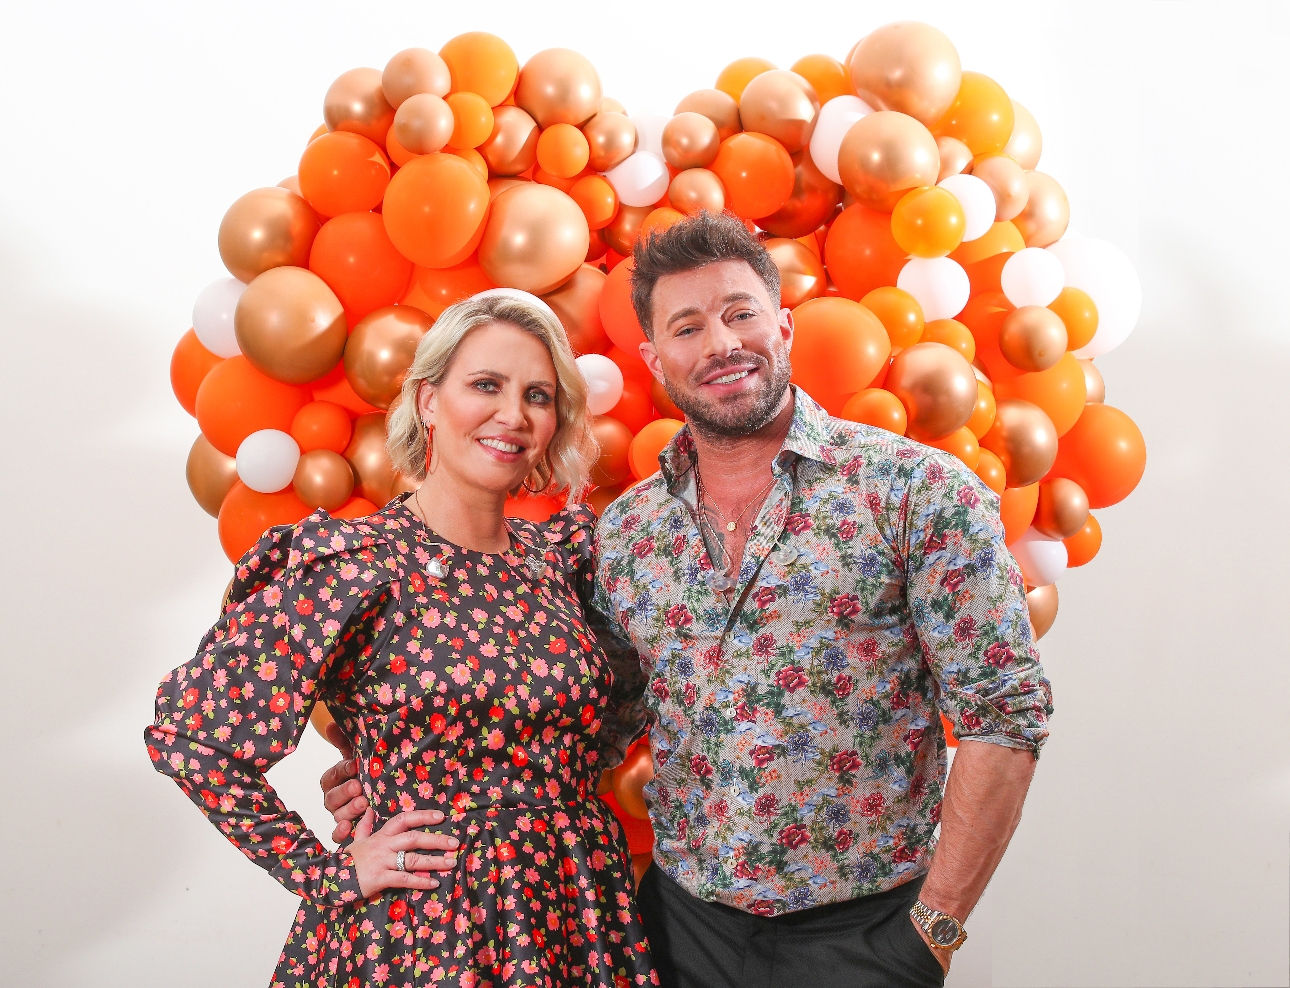 Claire Richards & Duncan James standing in front of orange balloons